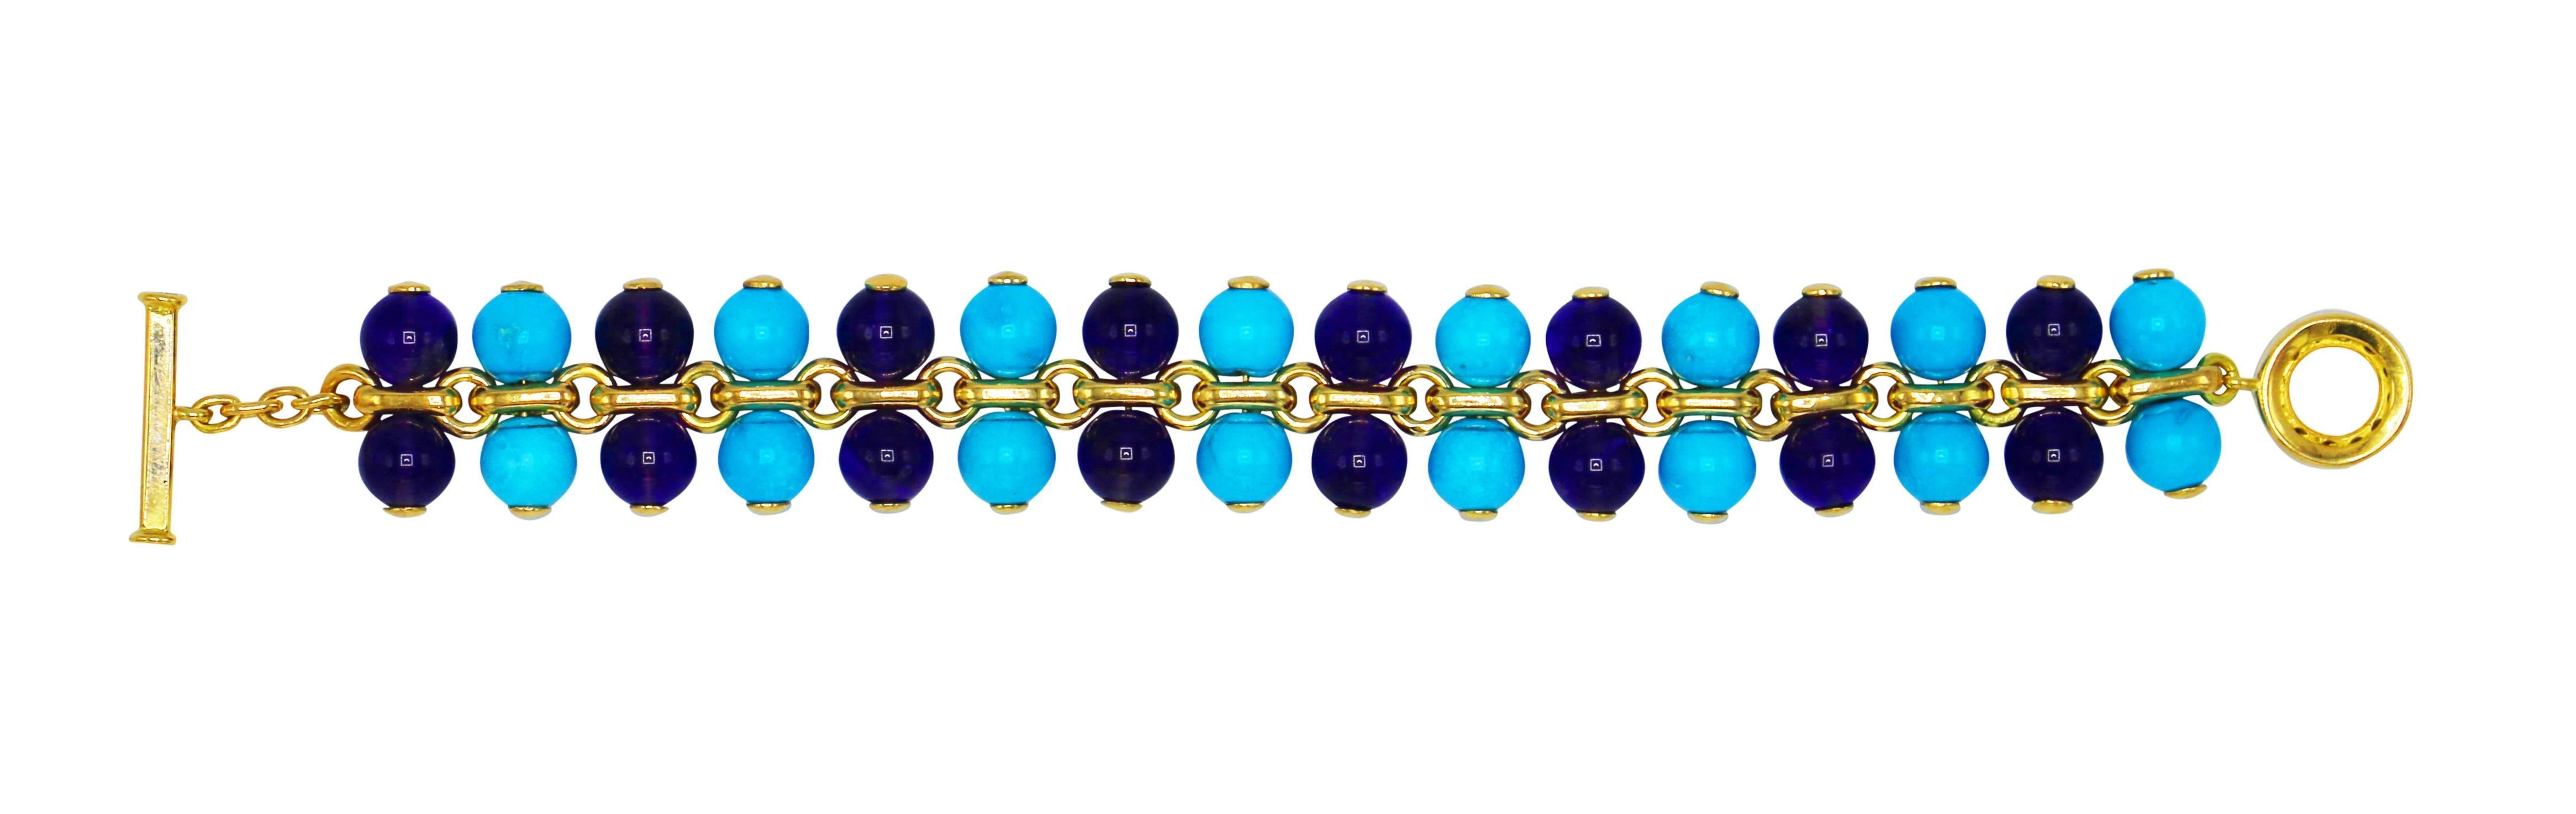 An original design by Rosaria Varra, the highly flexible bracelet composed of yellow gold links flanked on each side by numerous turquoise and amethyst beads measuring approximately 8.0 mm., completed by a circular clasp set with round diamonds